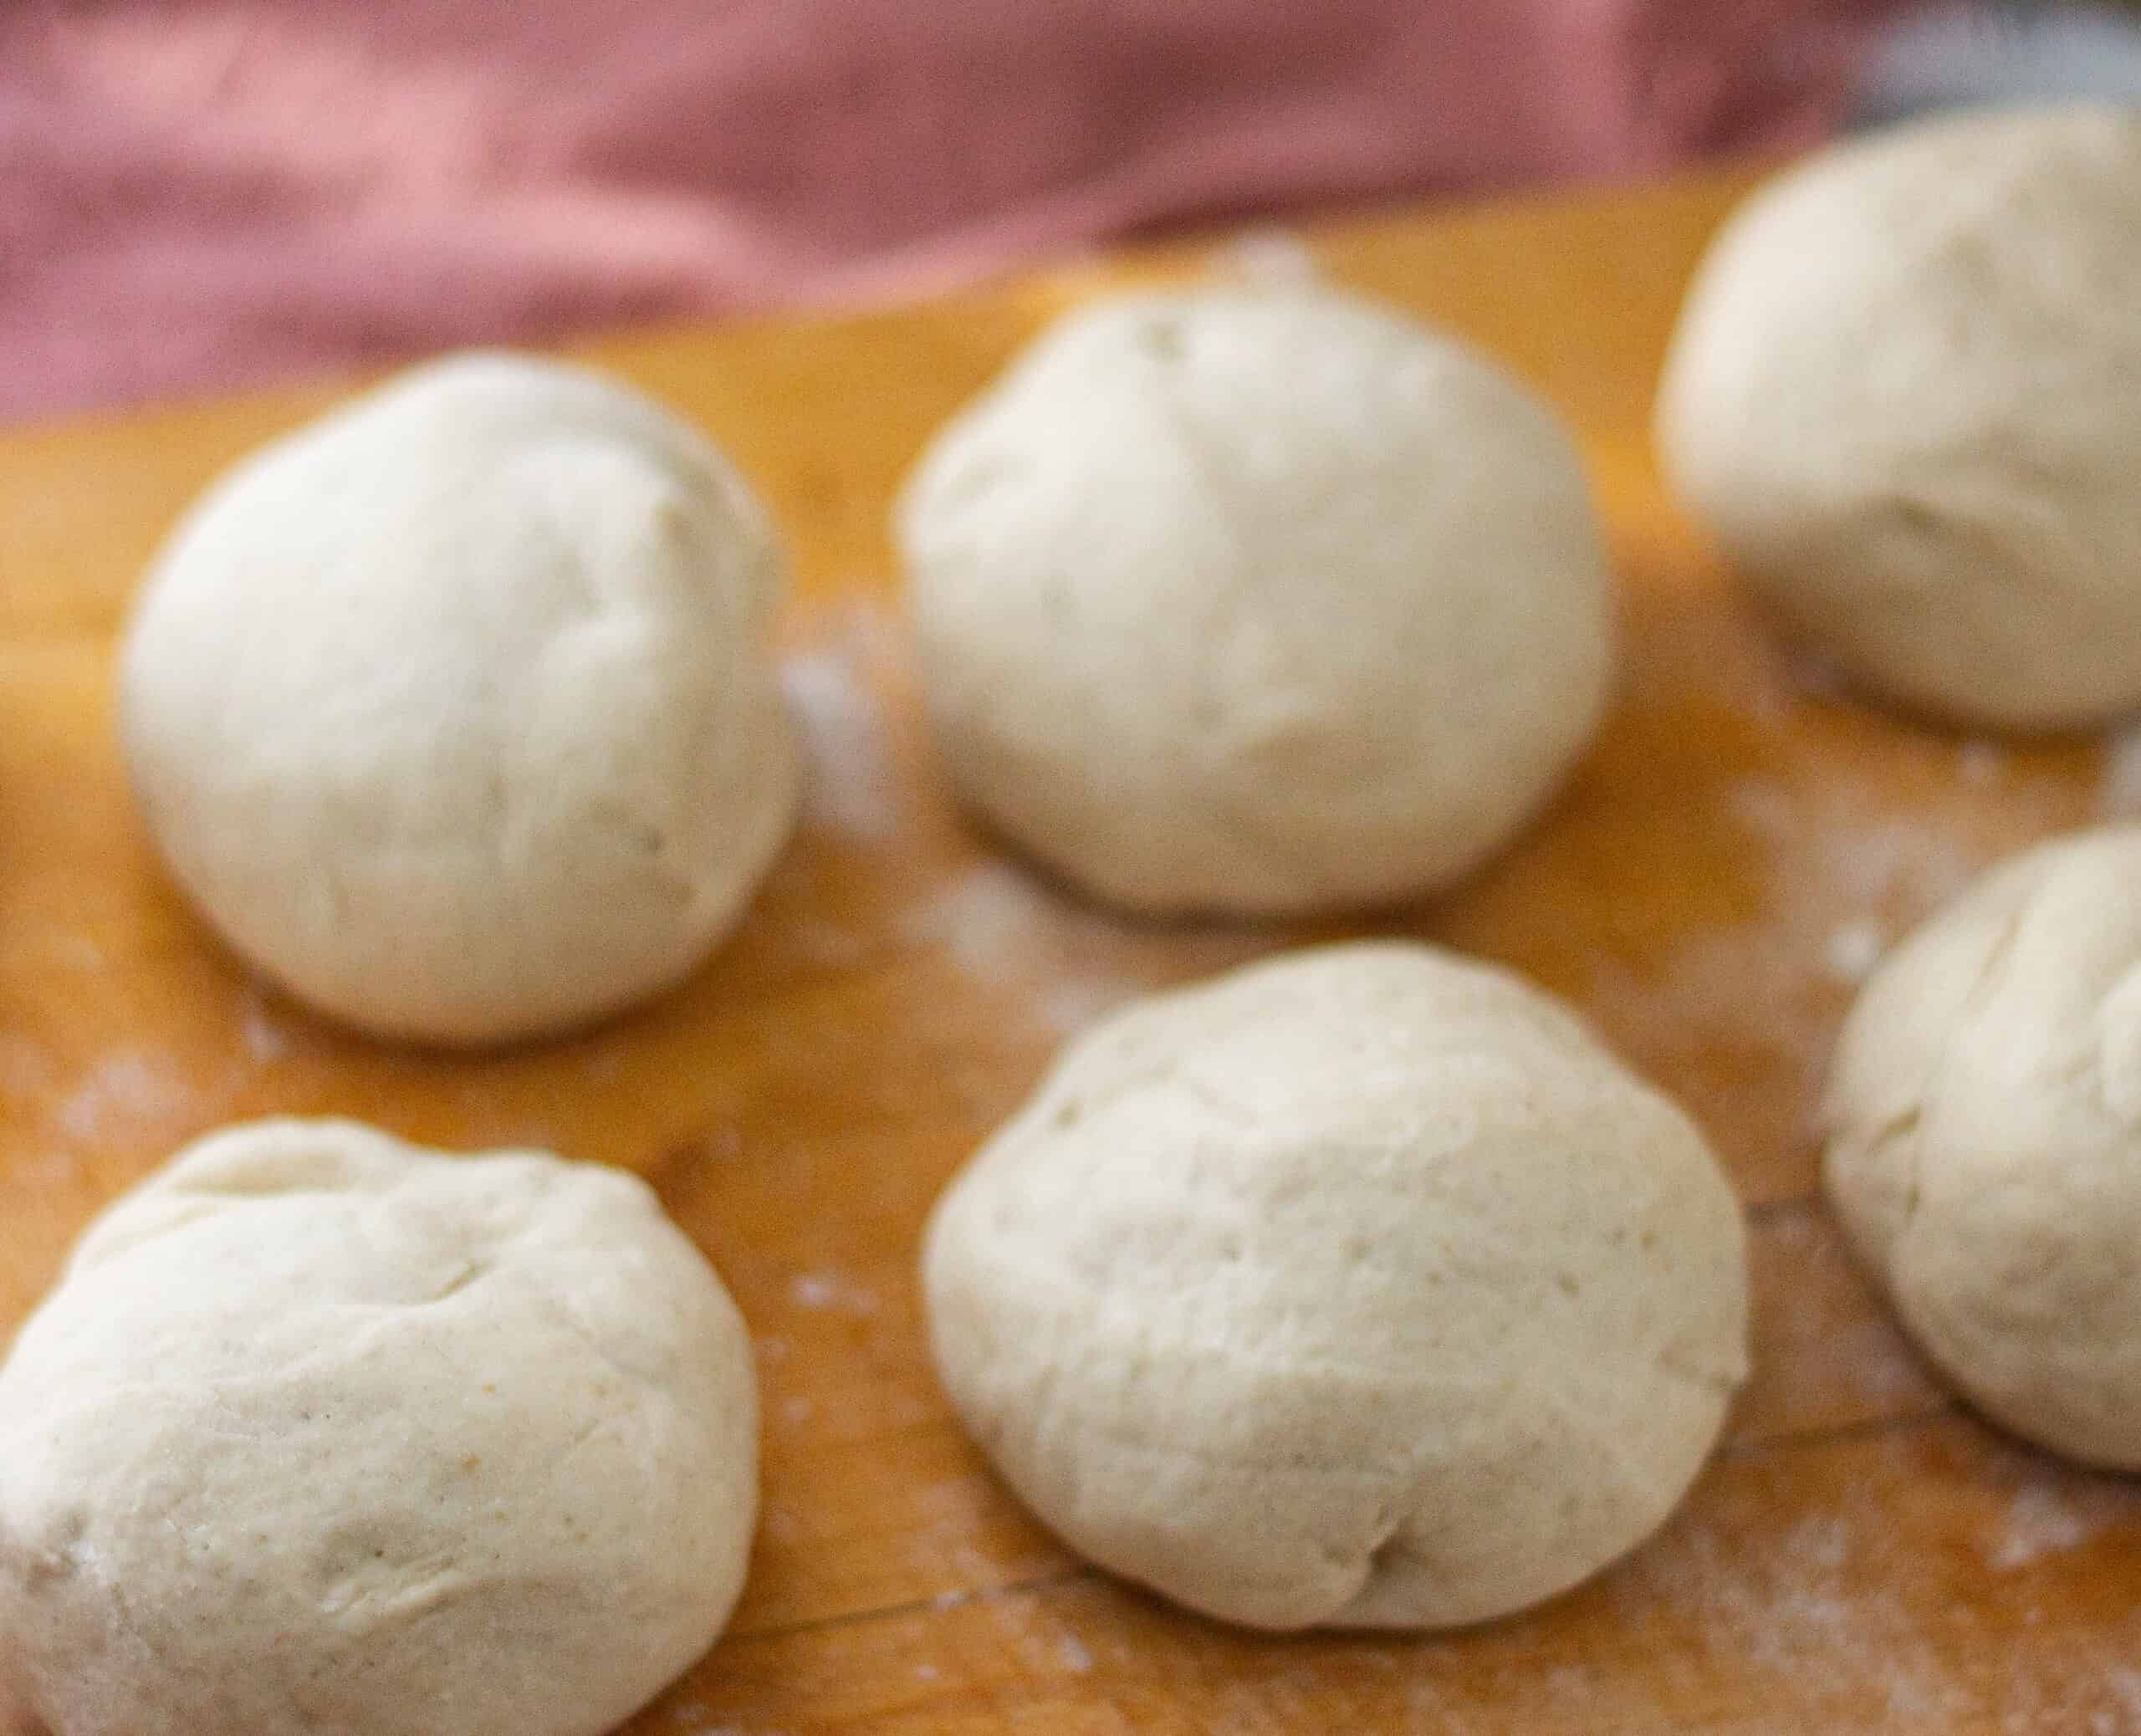 Rolling the dough into balls